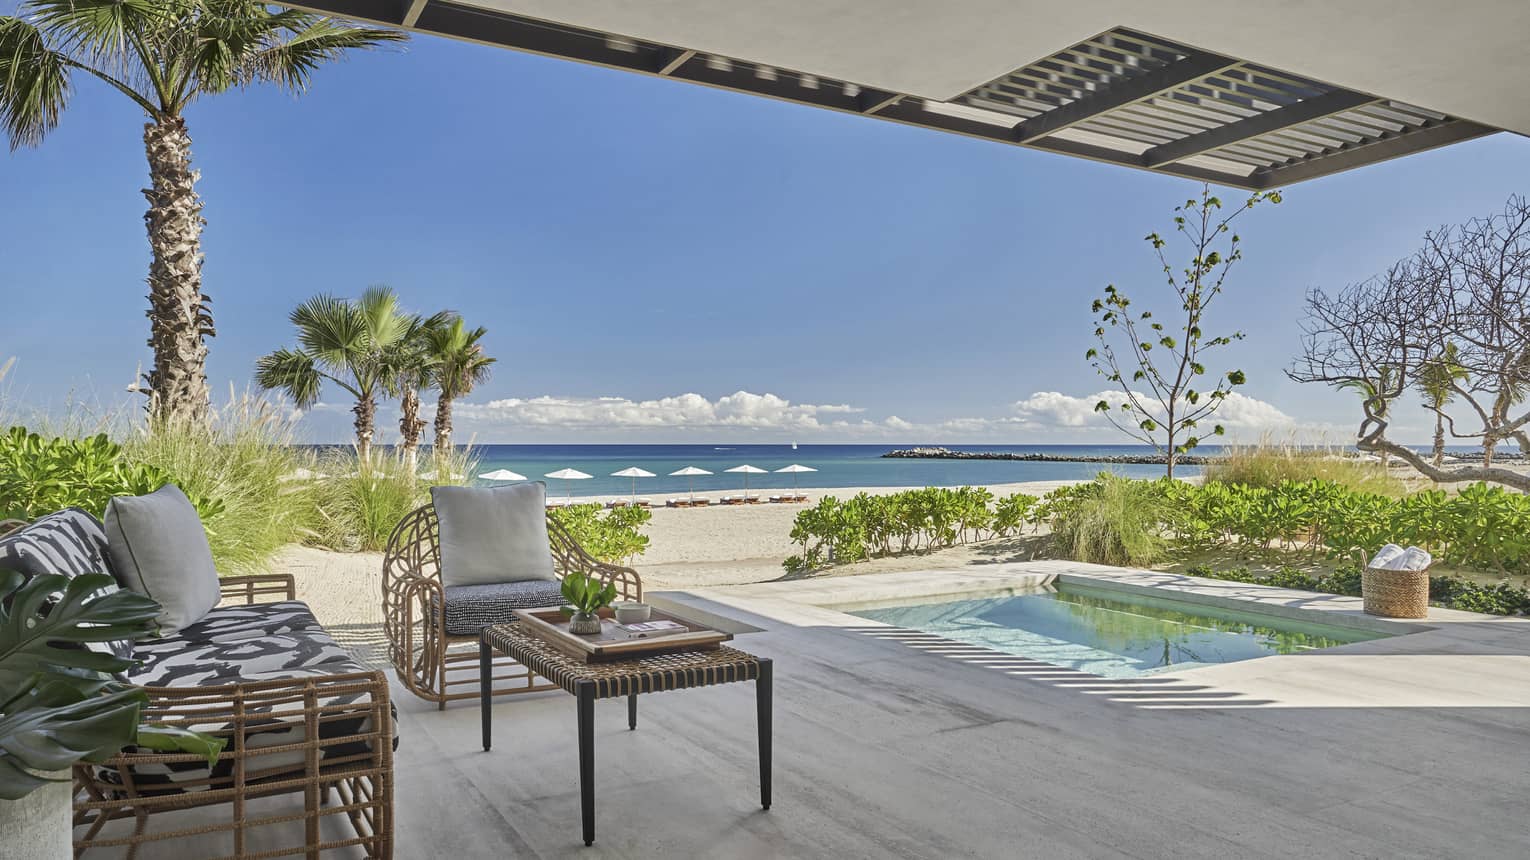 Outdoor terrace with beach and ocean view, small pool, two arm chairs and table